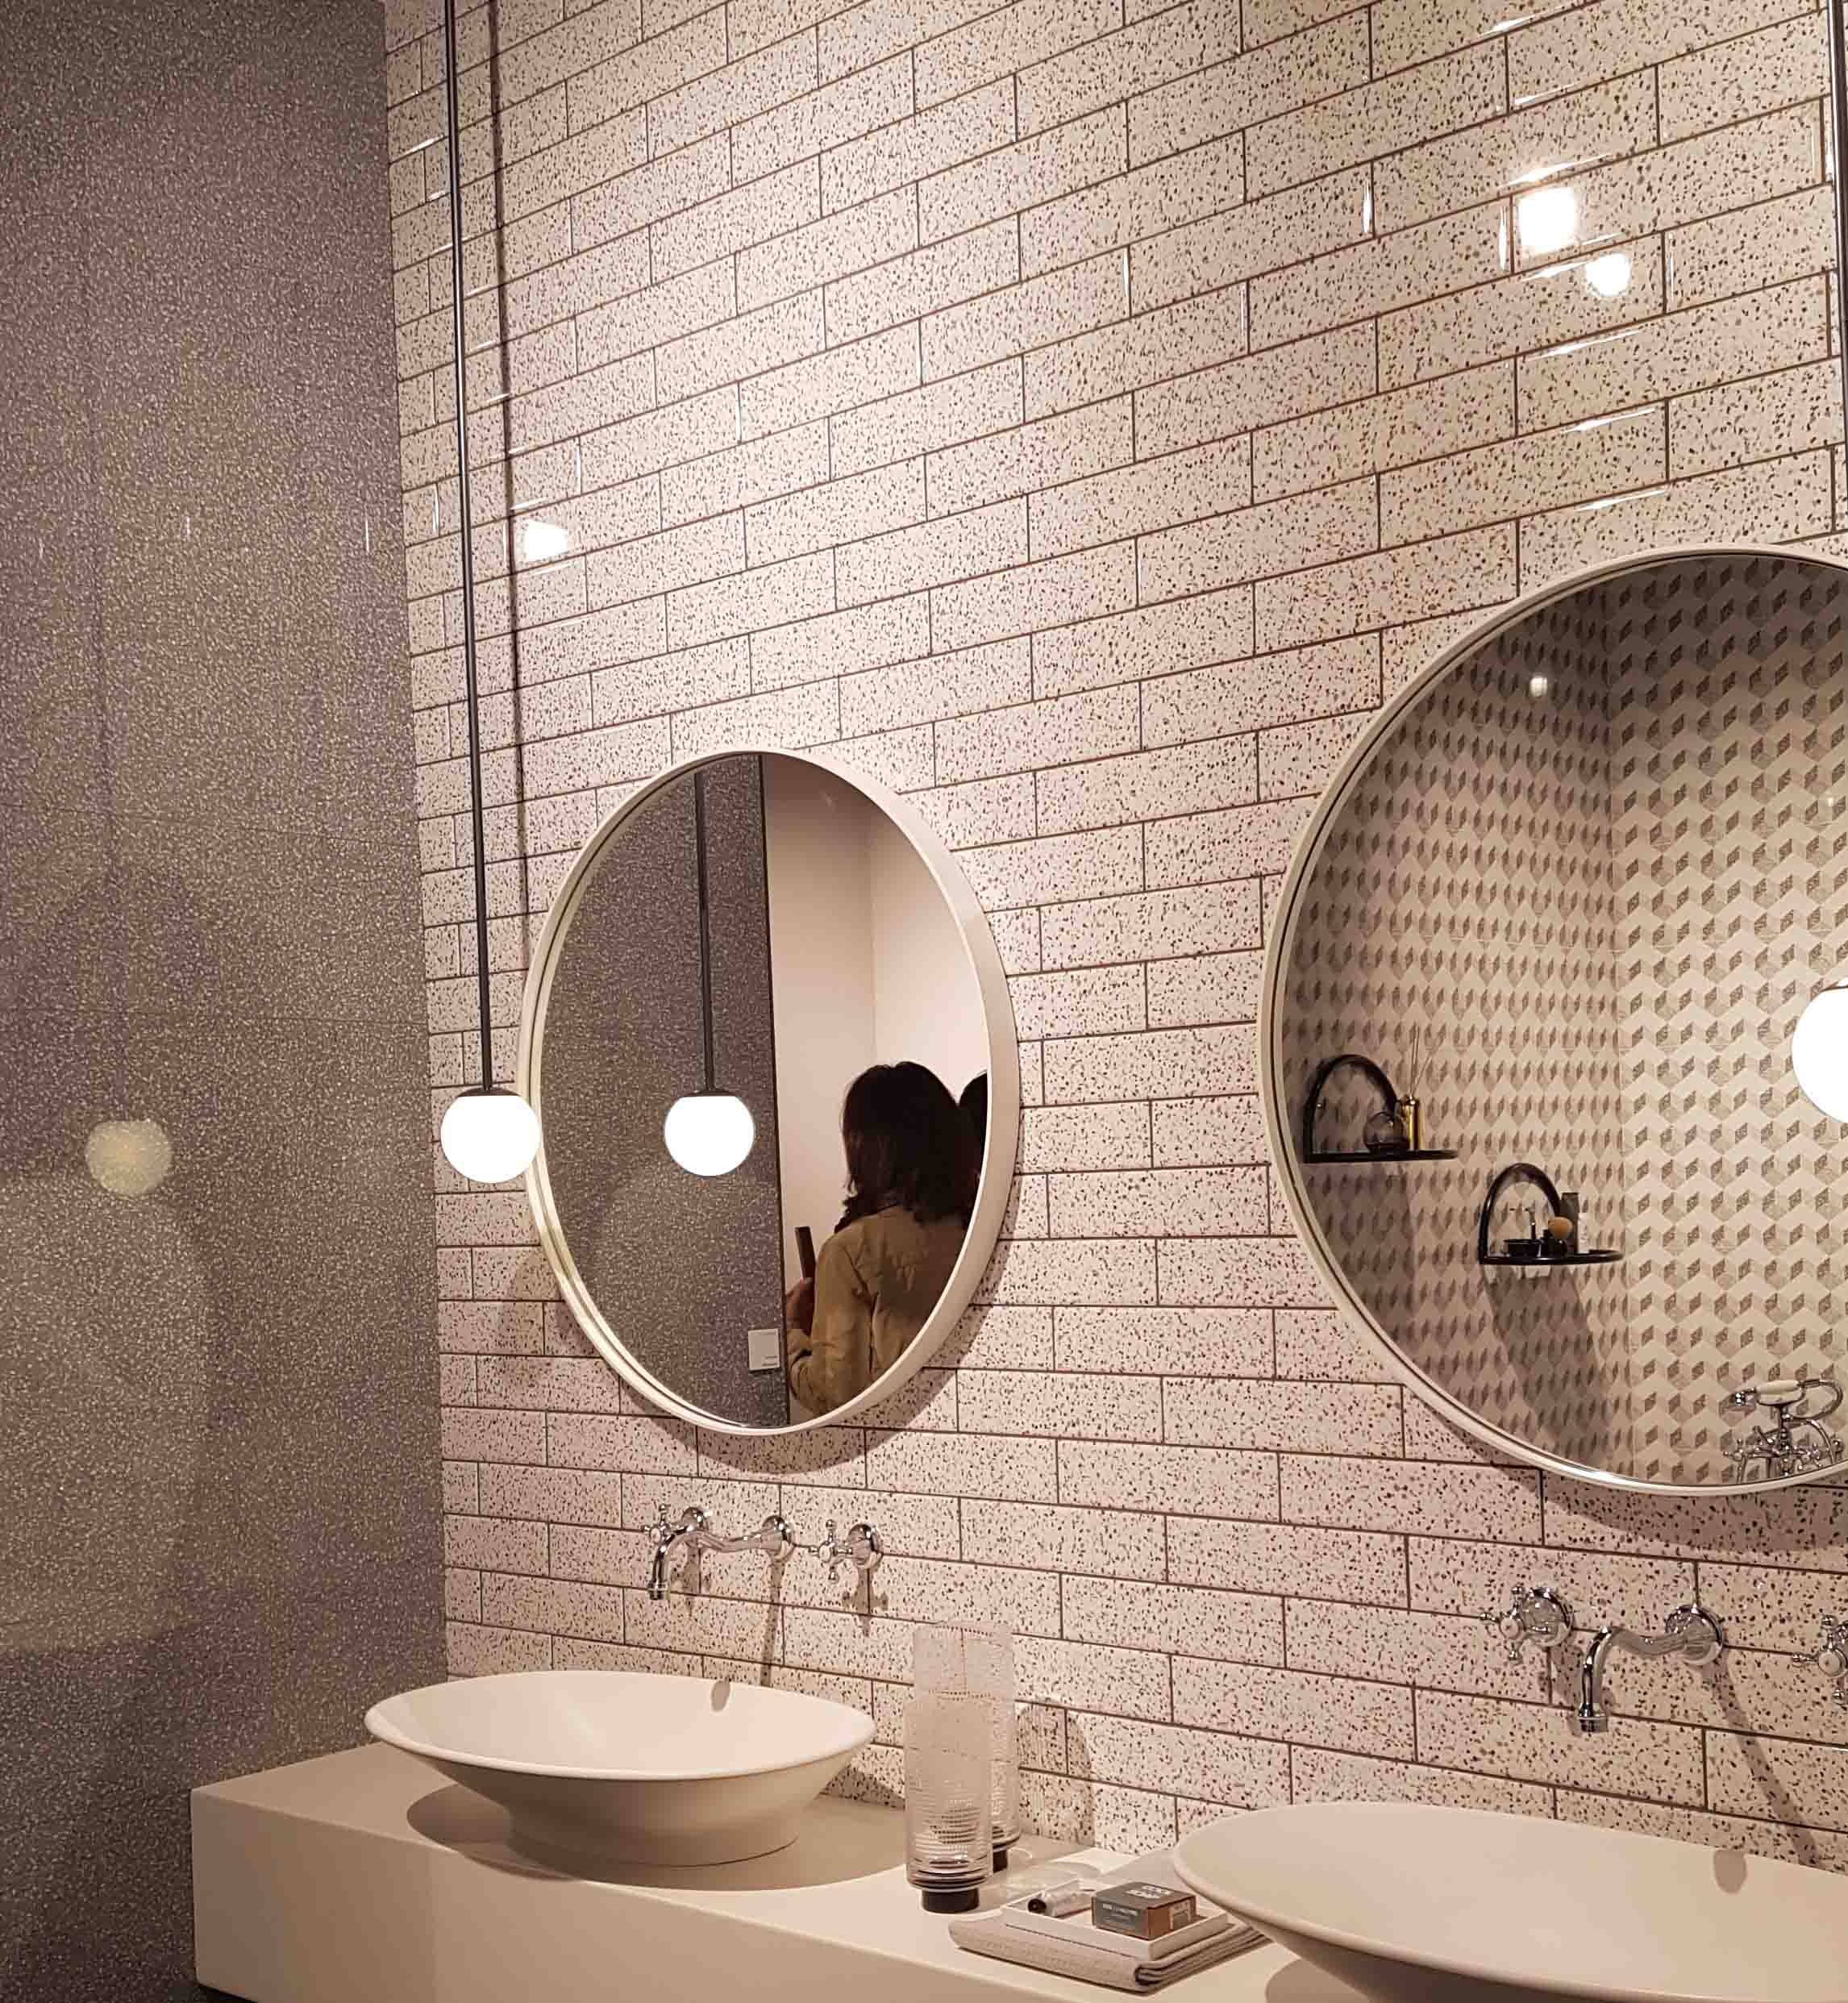 The Top 10 Tile Trends For 2018 Cirillo Lighting And Ceramics